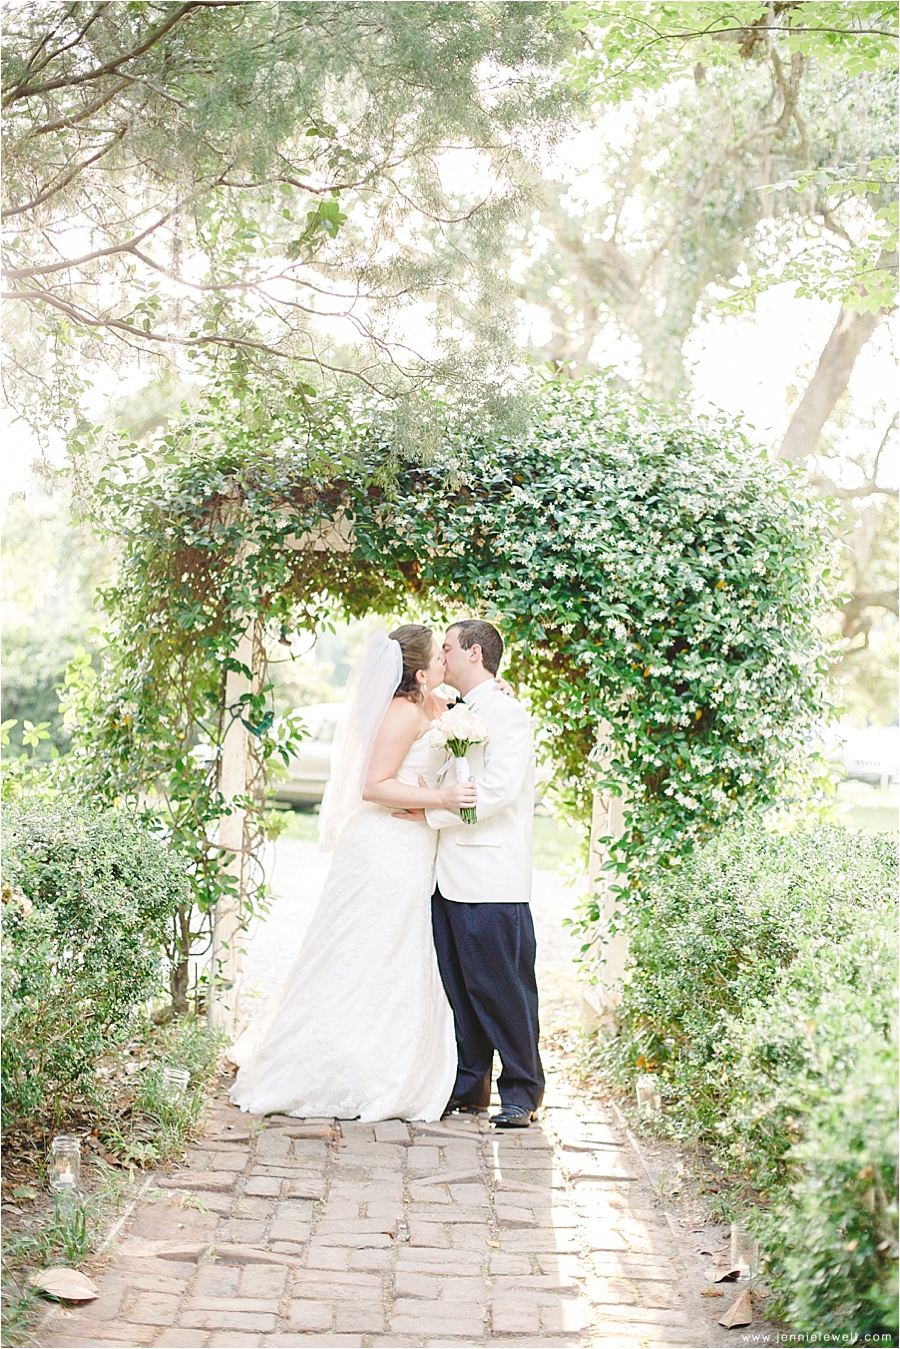 Wedding at the Old Place La Maison in Gautier Mississippi photographed by Jennie Tewell Photography 0033